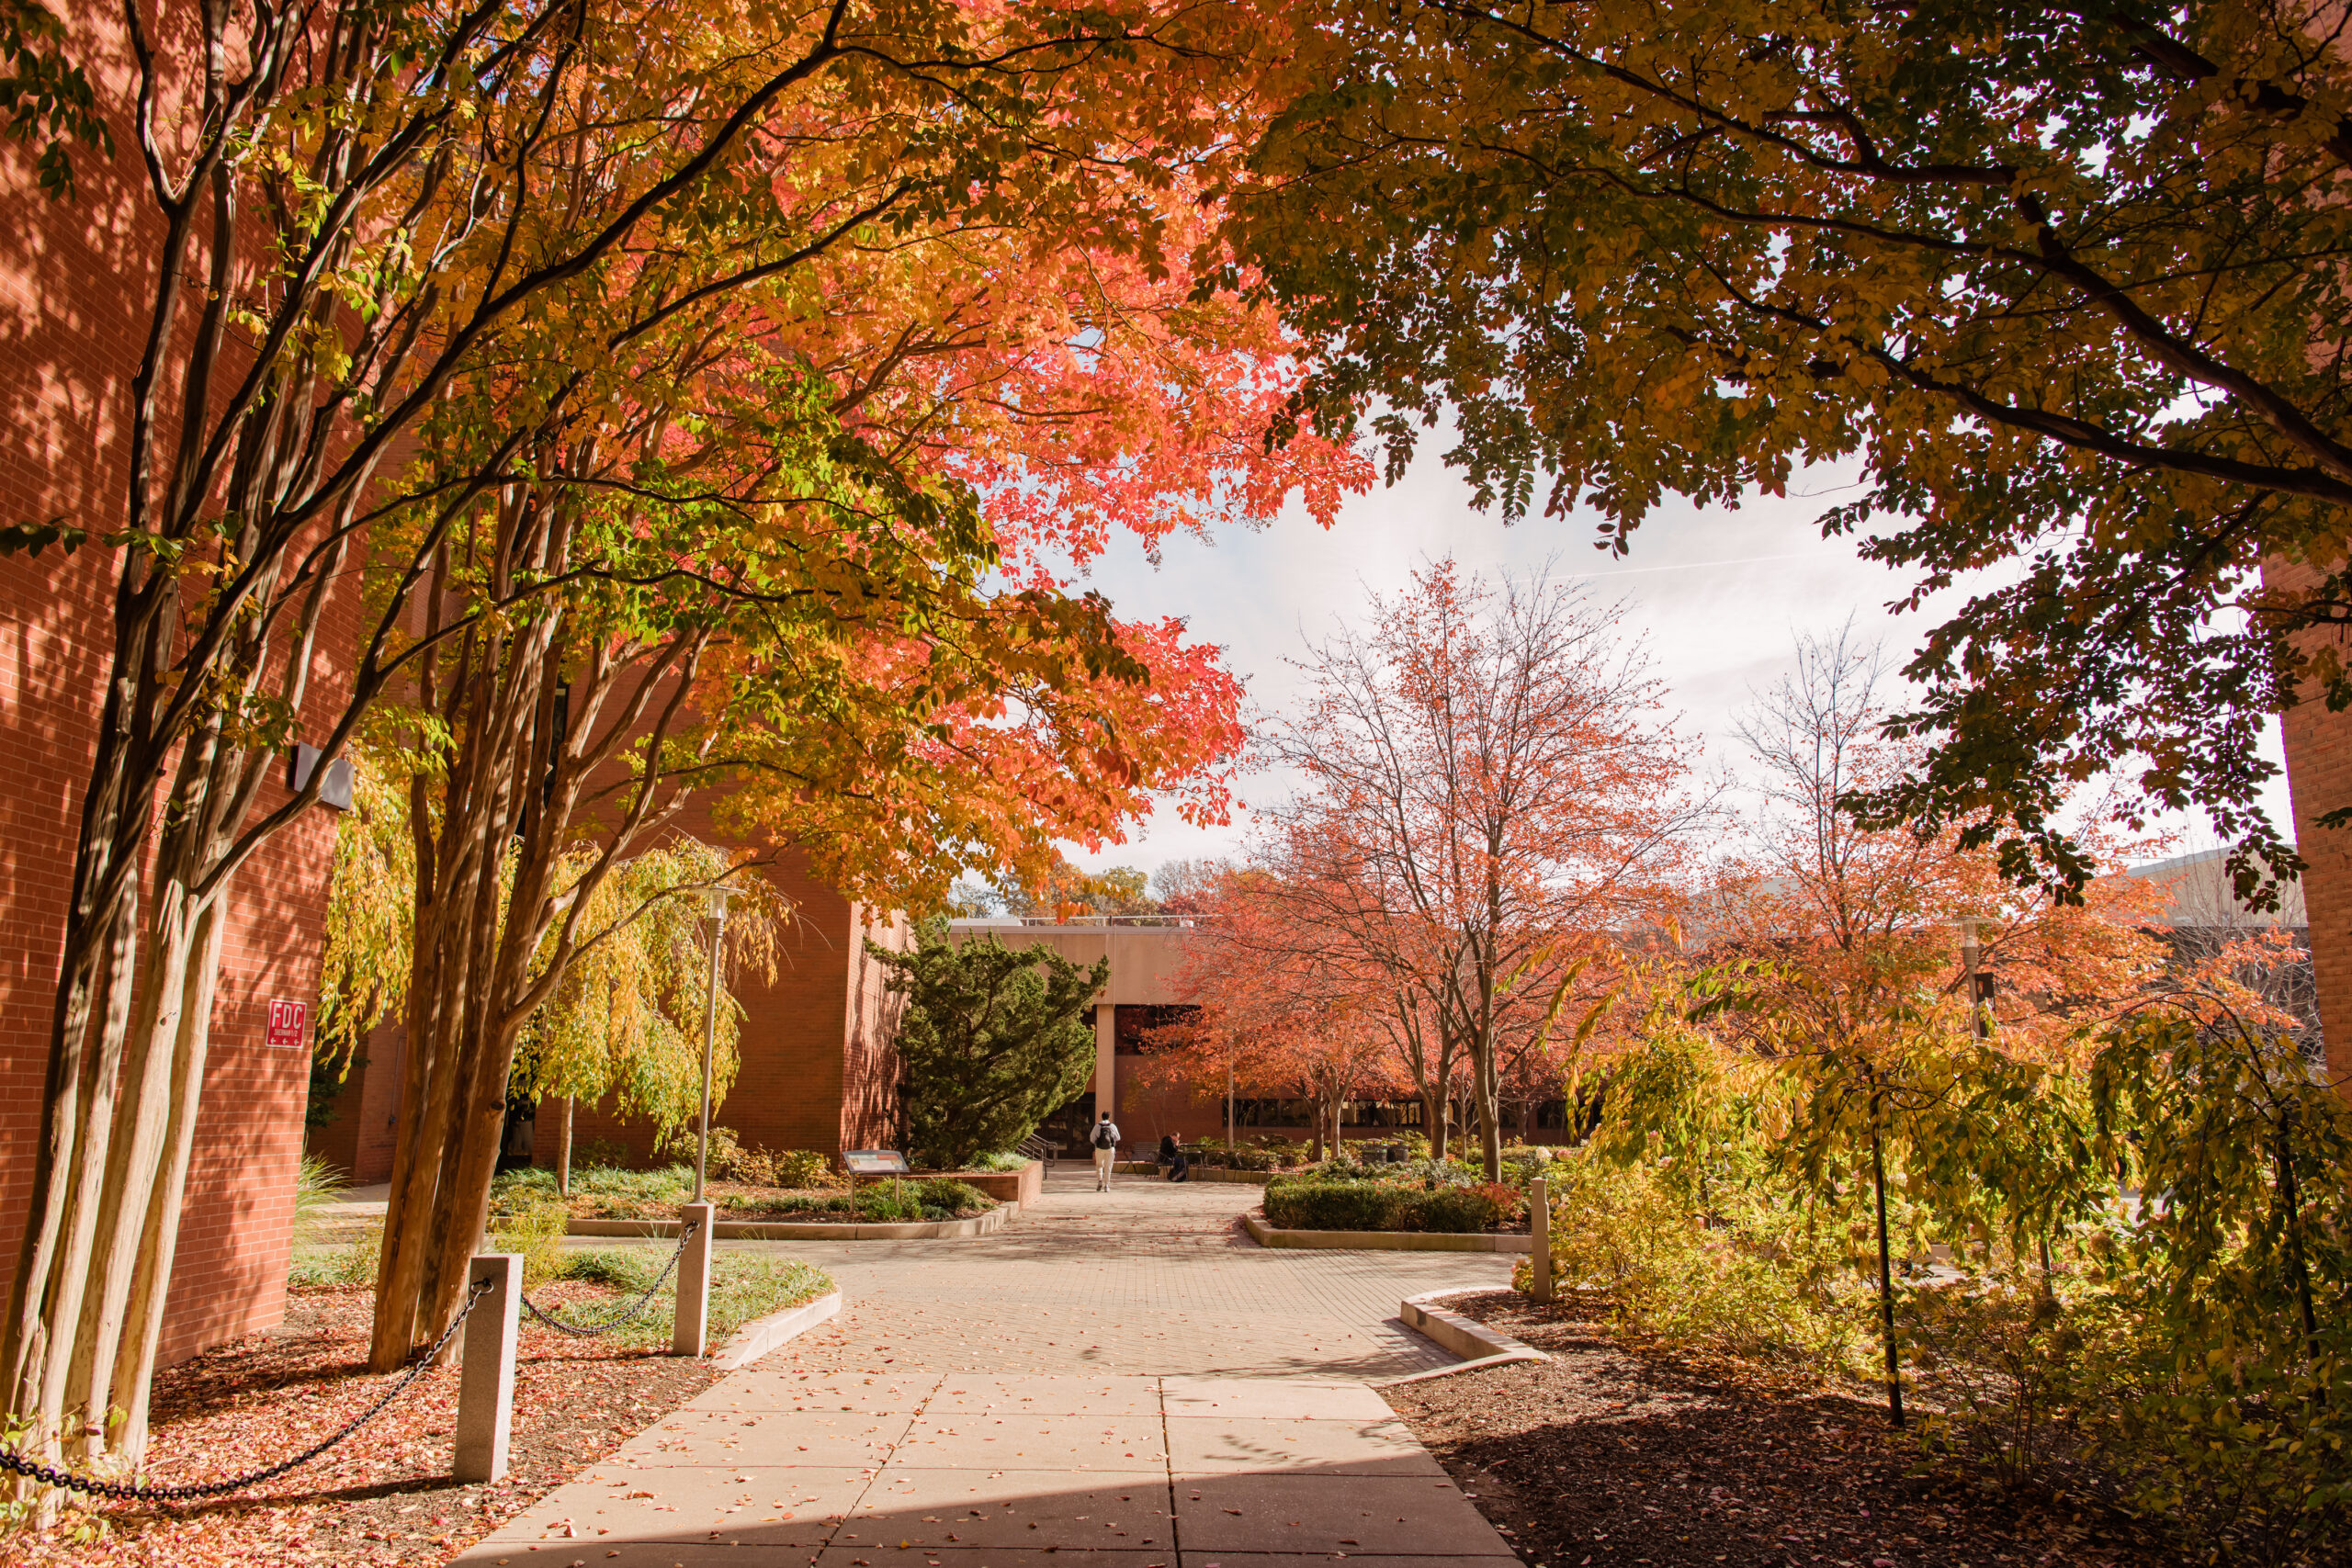 umbc in autumn, filled with colorful trees